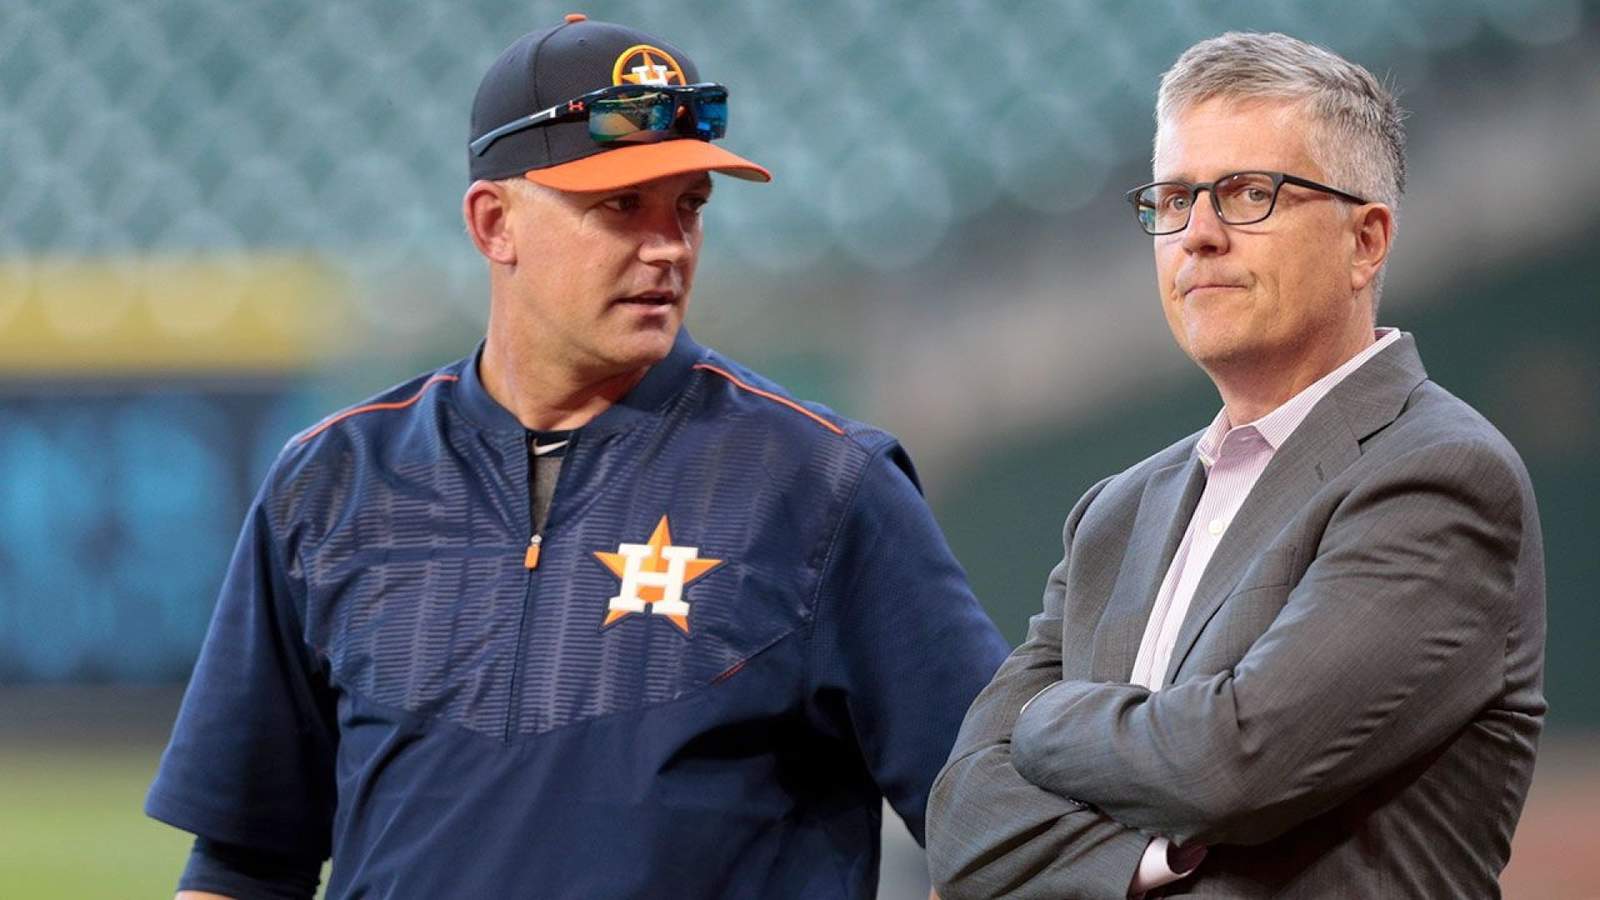 A breakdown on Astros sign-stealing fallout